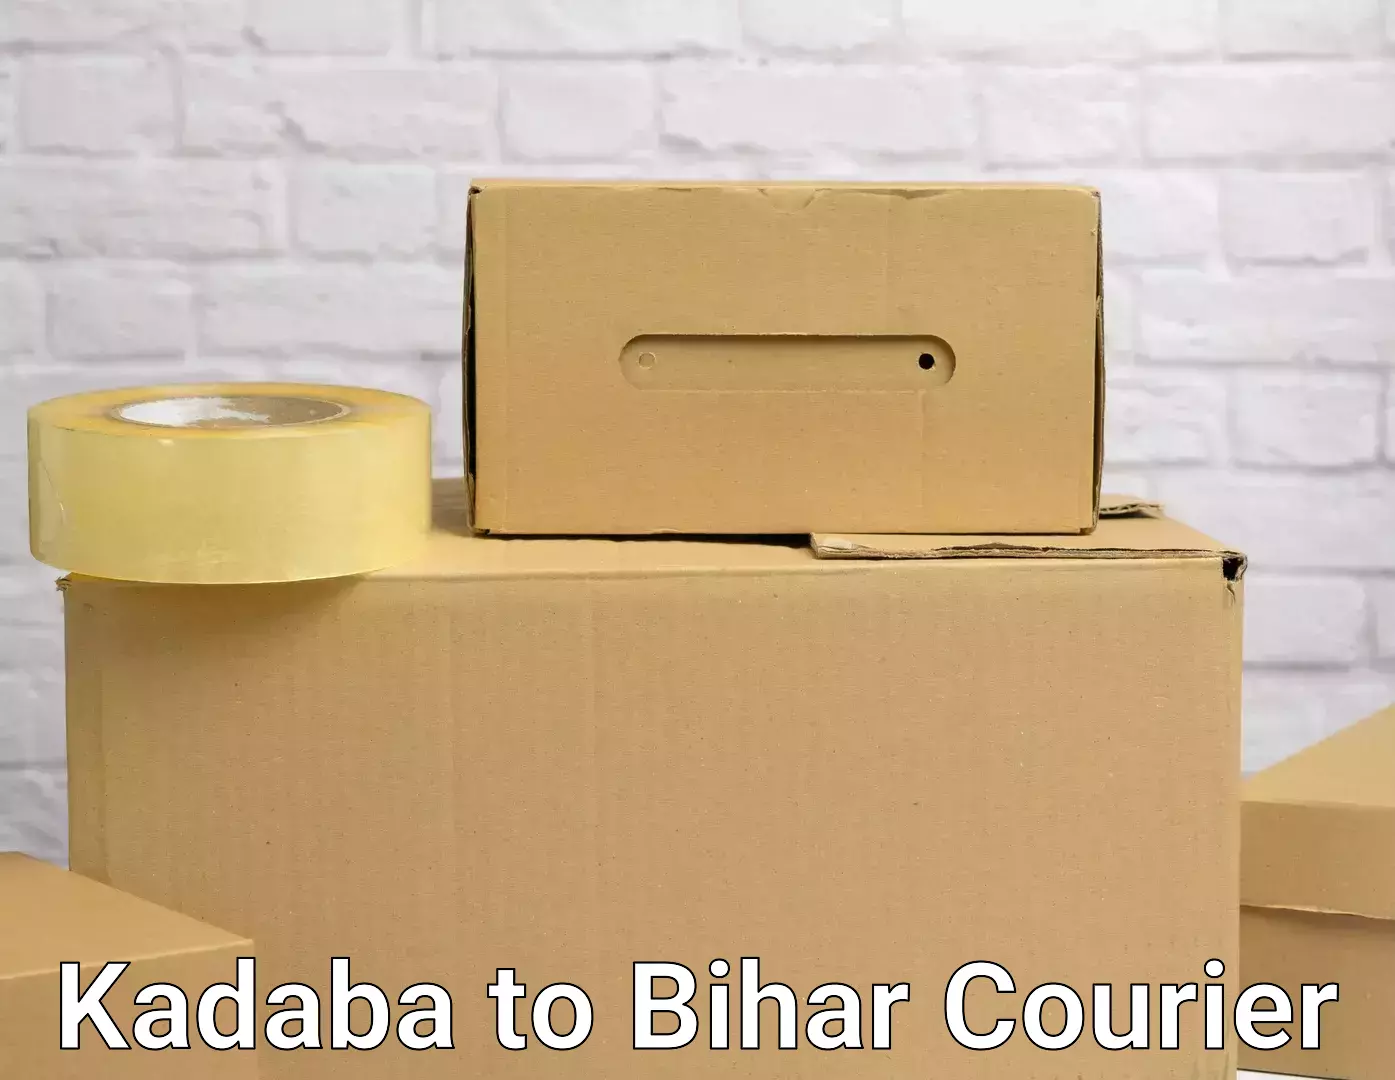 Furniture delivery service Kadaba to Gauripur